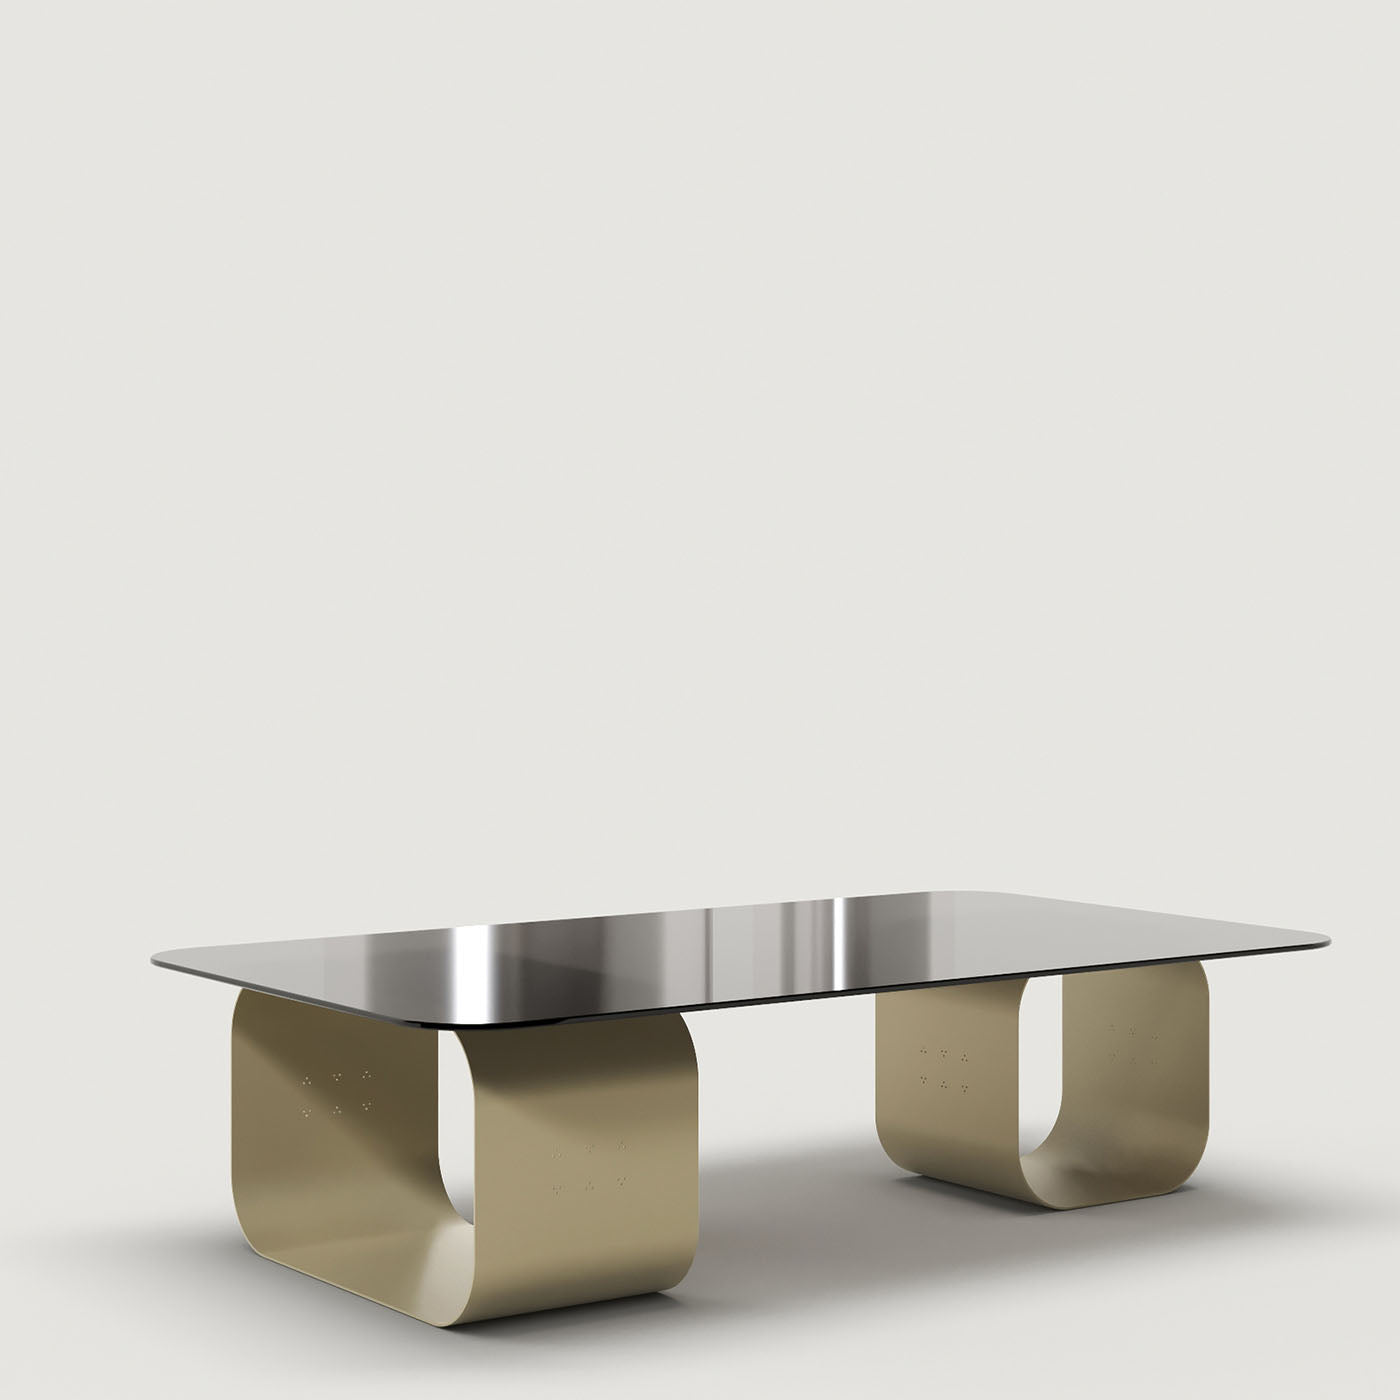 Maiz Large Glass and Steel Coffee Table - Alternative view 2